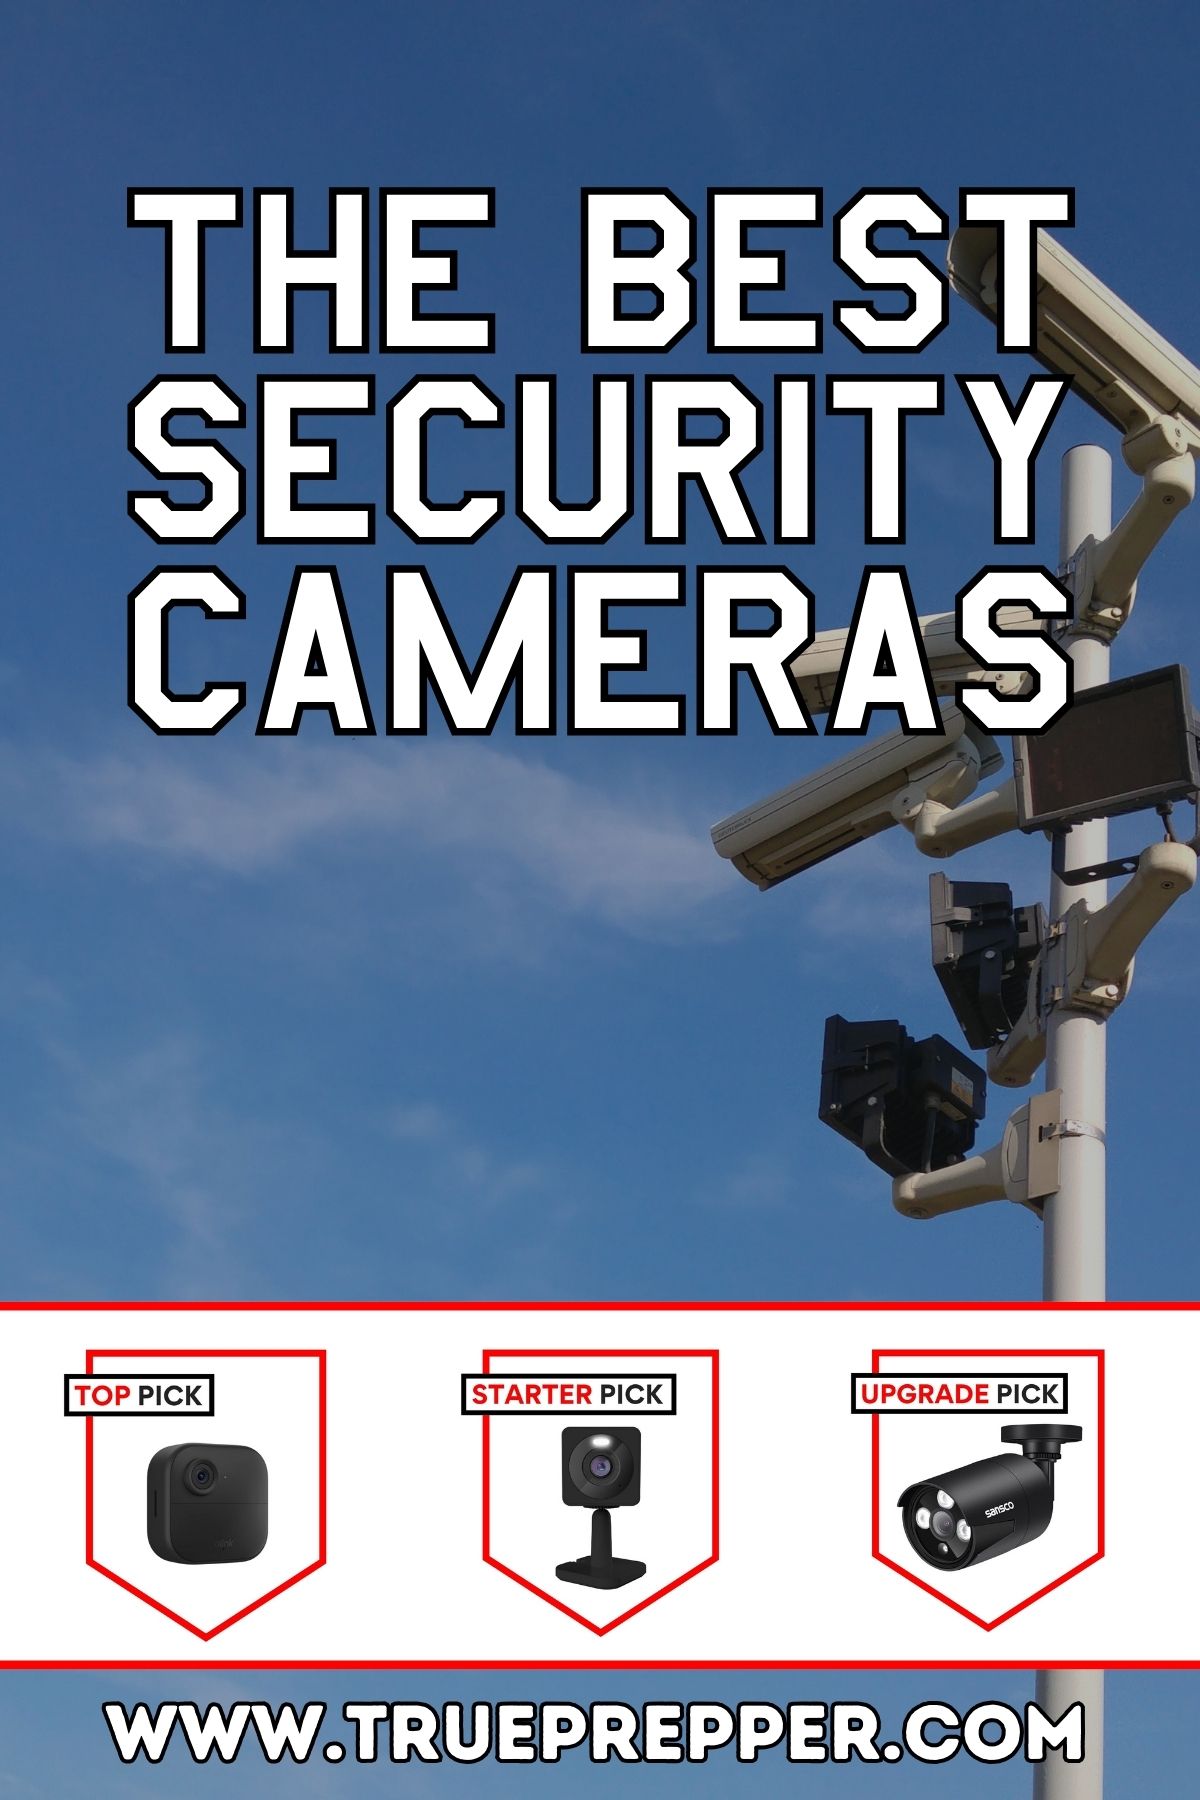 The Best Security Cameras